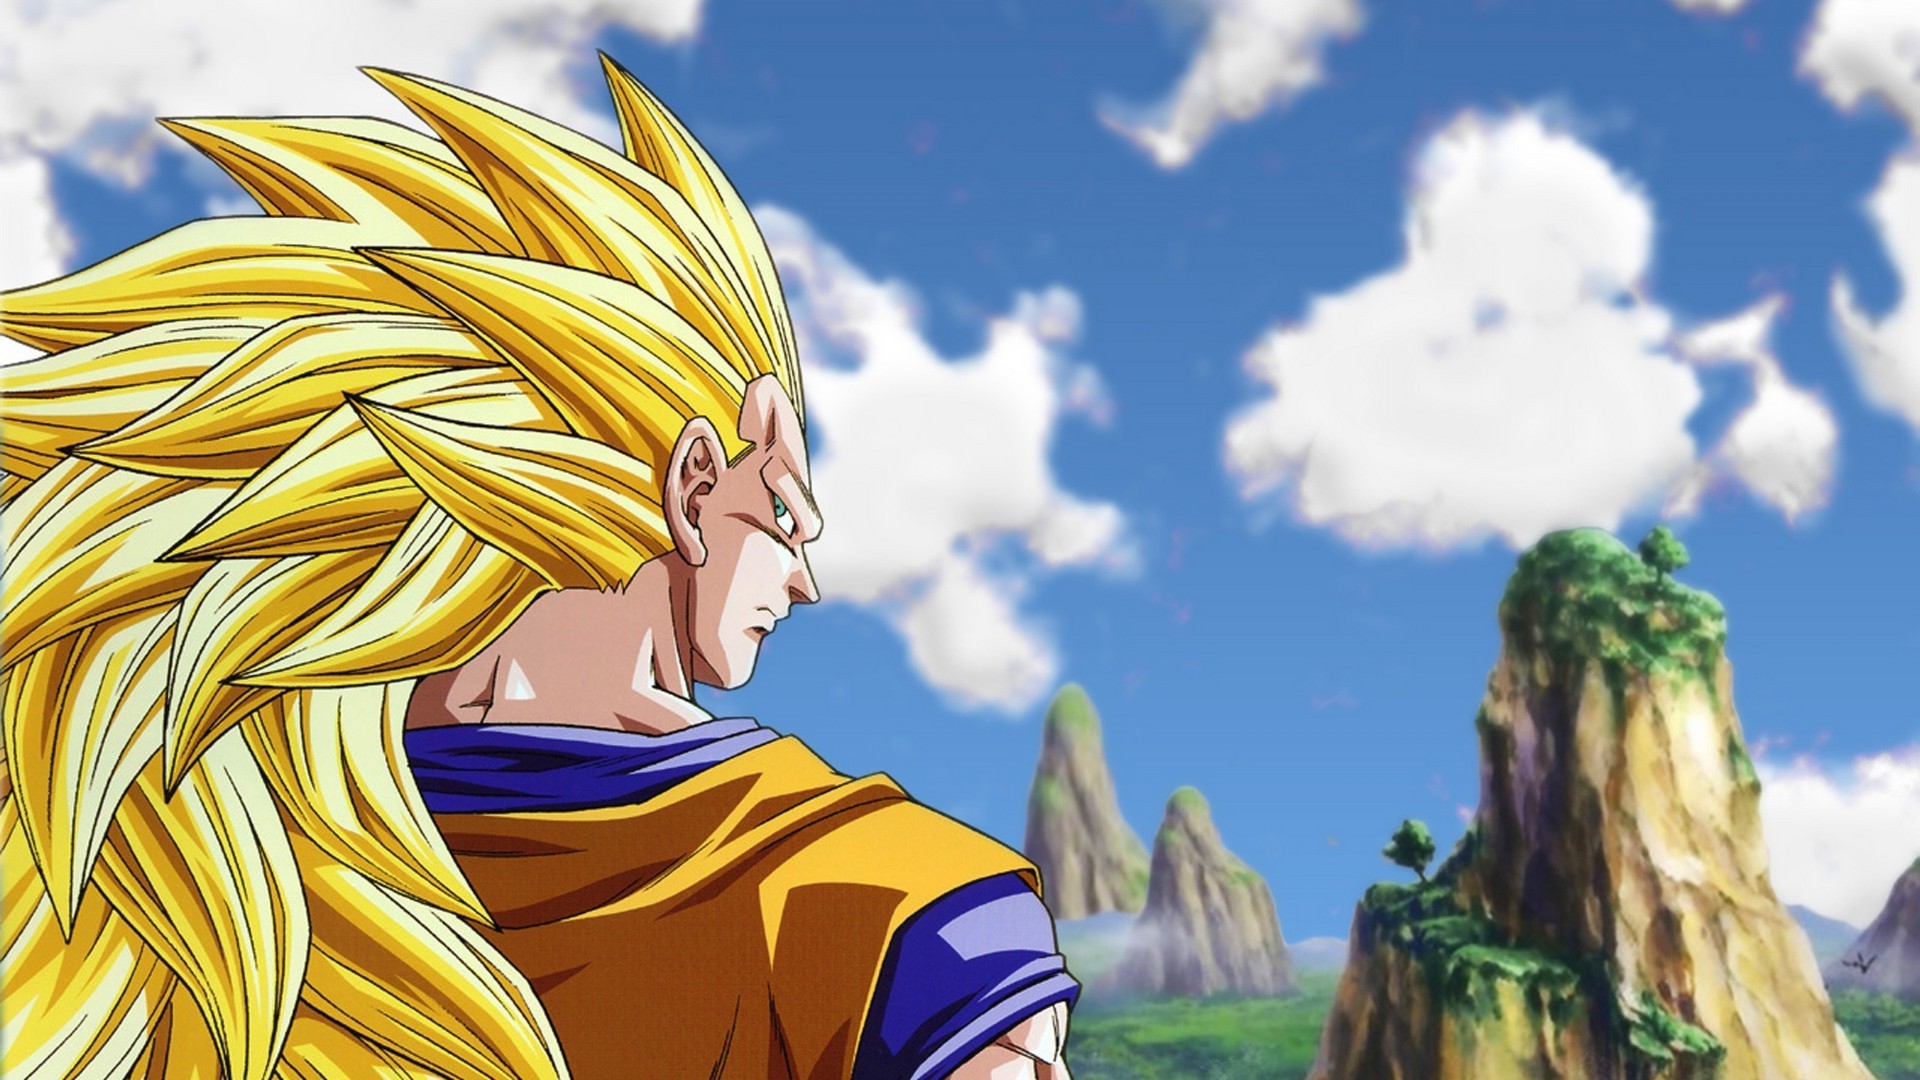 Goku SSJ3 Desktop Backgrounds With Resolution 1920X1080 pixel. You can make this wallpaper for your Desktop Computer Backgrounds, Mac Wallpapers, Android Lock screen or iPhone Screensavers